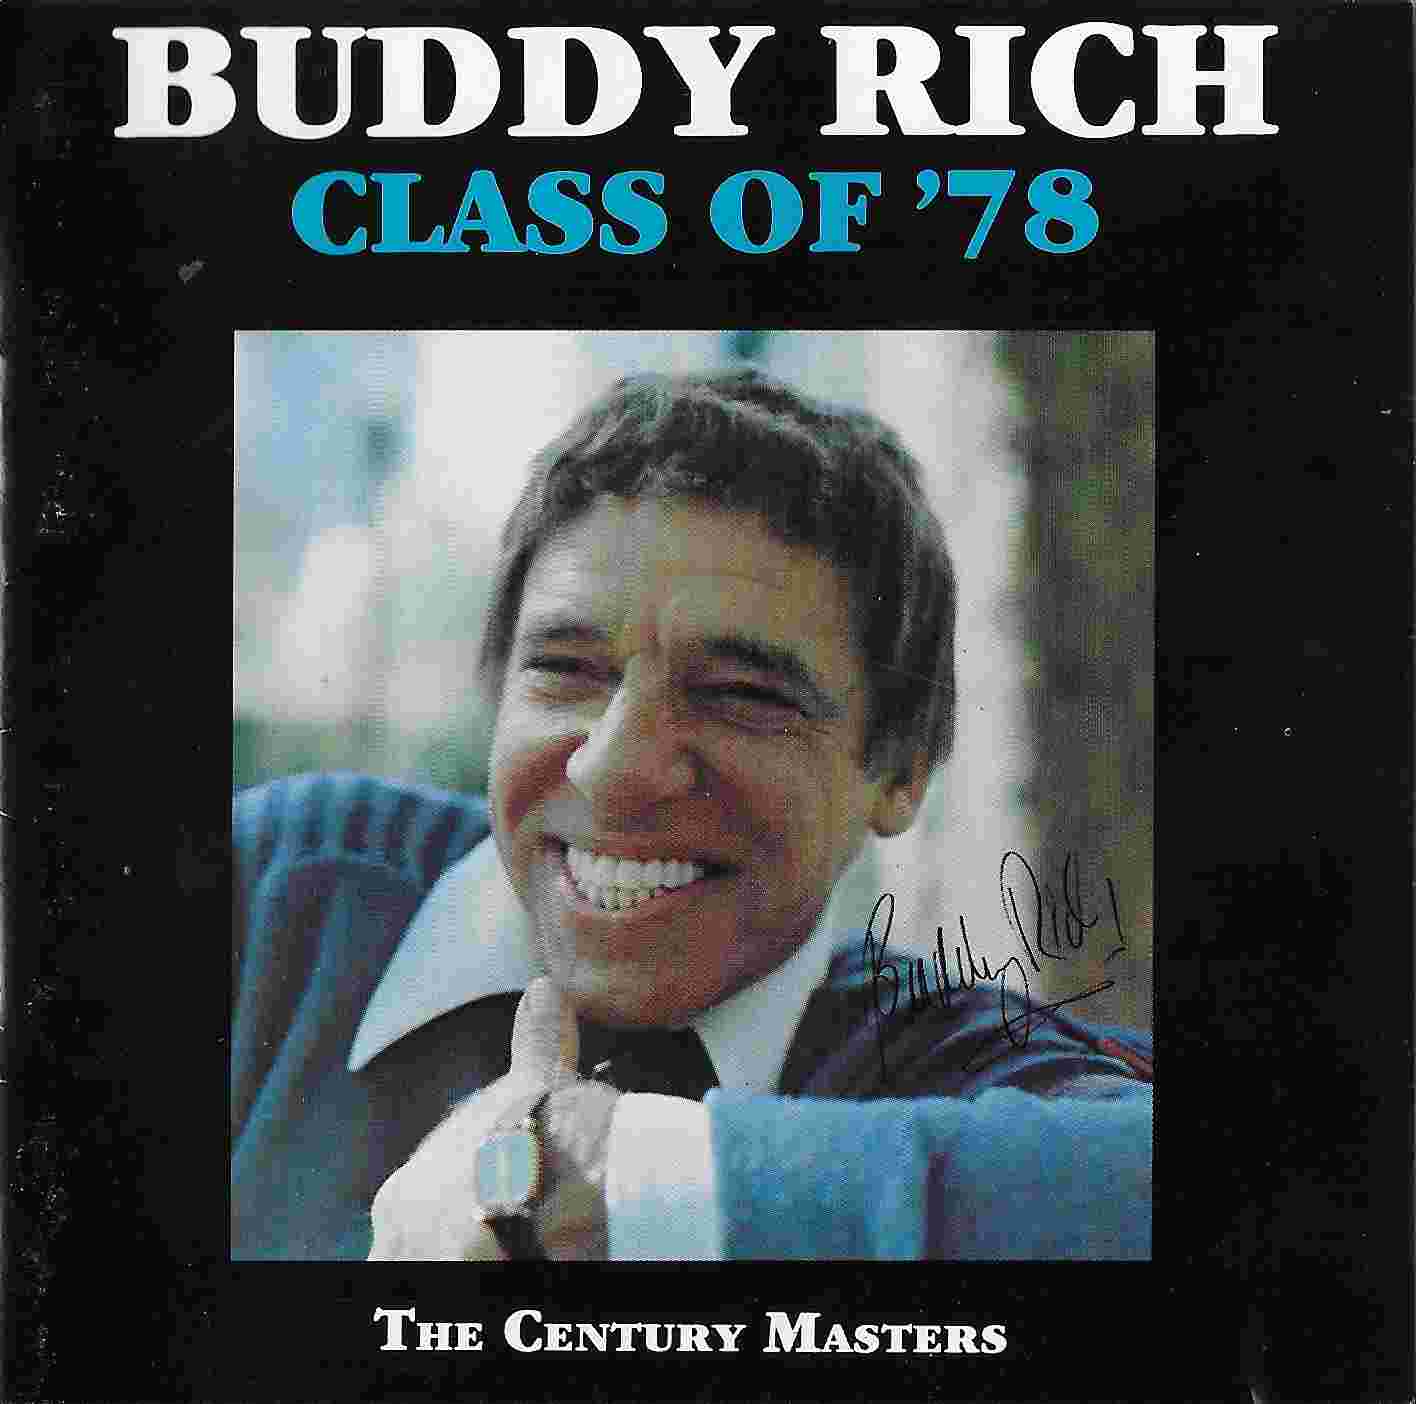 Picture of CJCD 832 The Century Catalogue - Buddy Rich class of 78 by artist The Buddy Rich Big Band from the BBC cds - Records and Tapes library